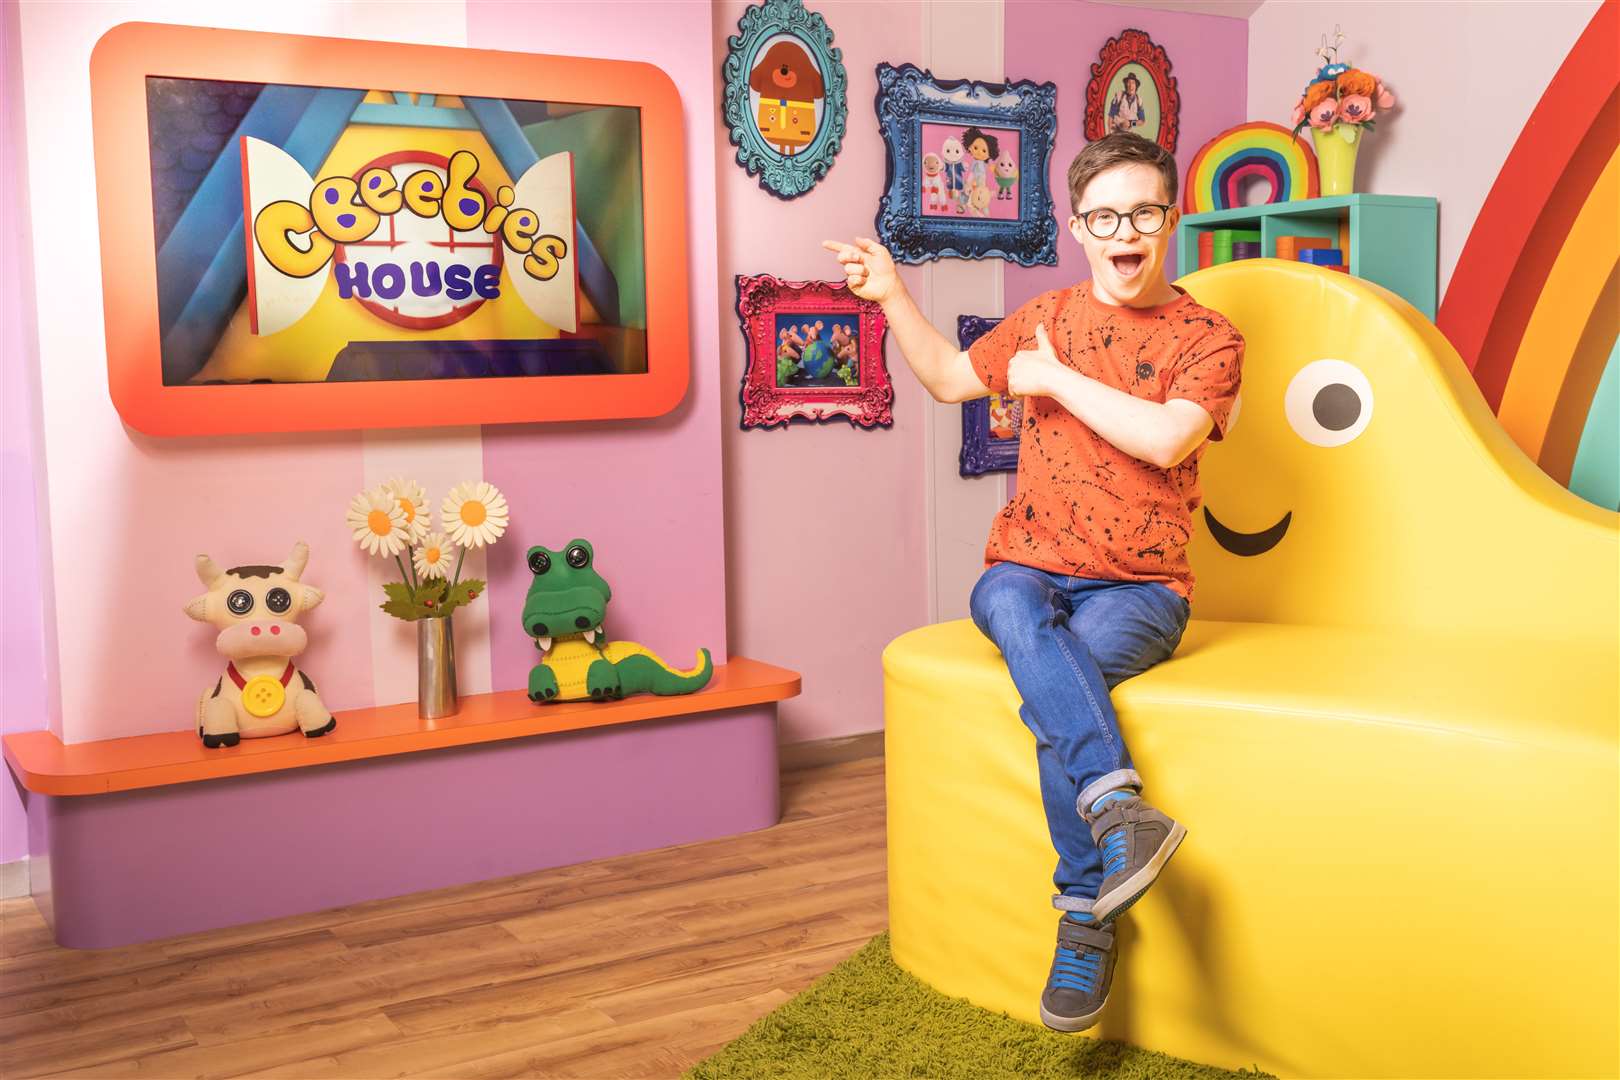 George Webster, an ambassador for Mencap, has joined Cbeebies